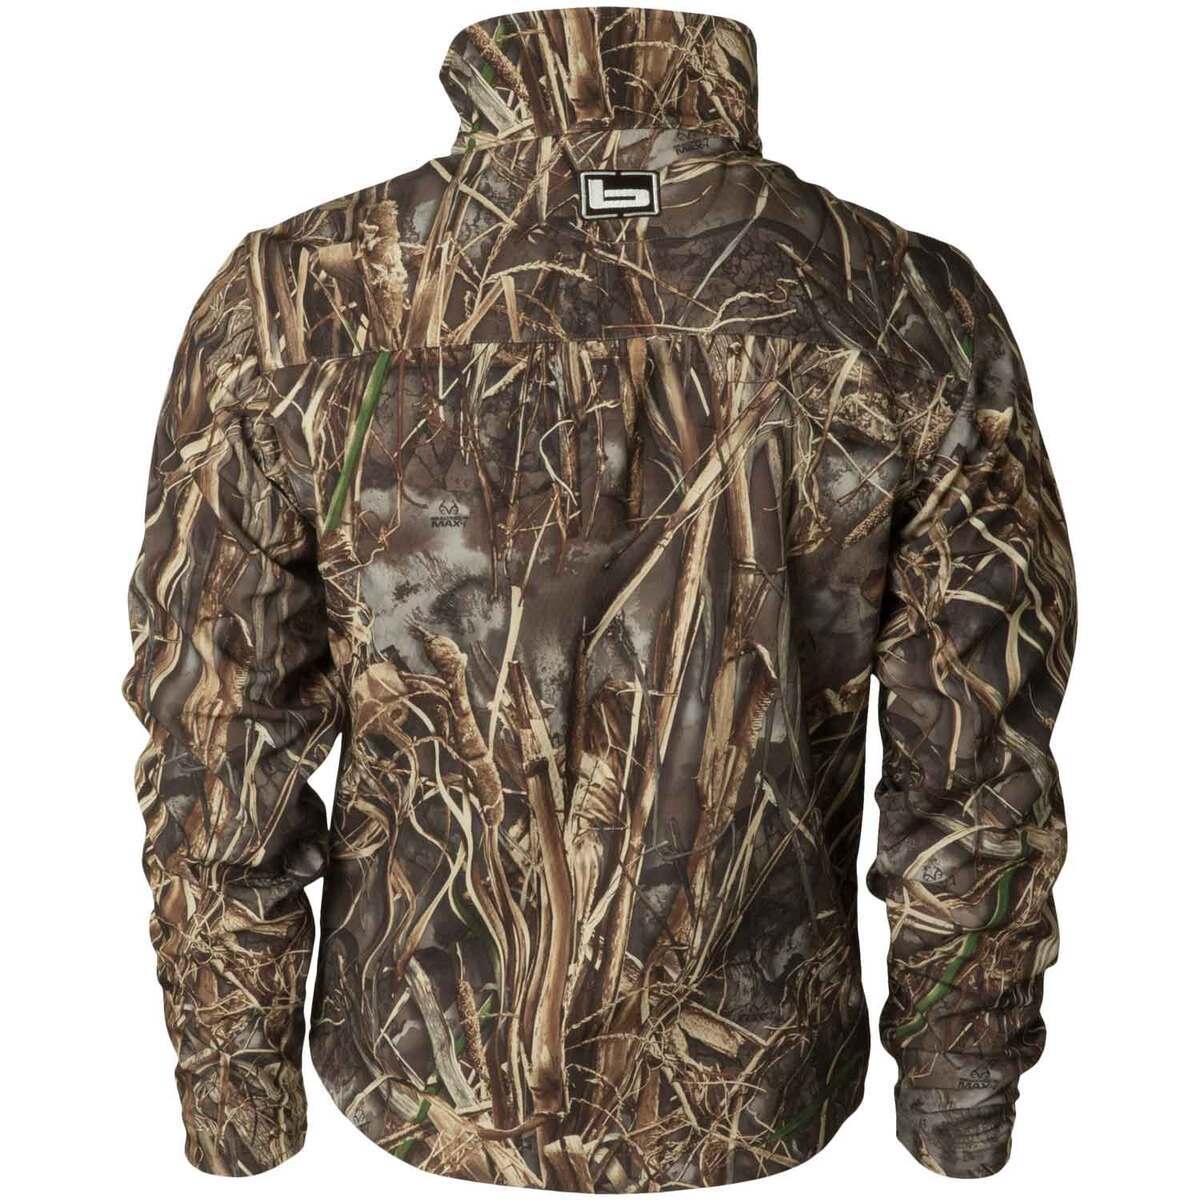 Banded Men's Max-7 Utility 2.0 Hunting Jacket | Sportsman's Warehouse